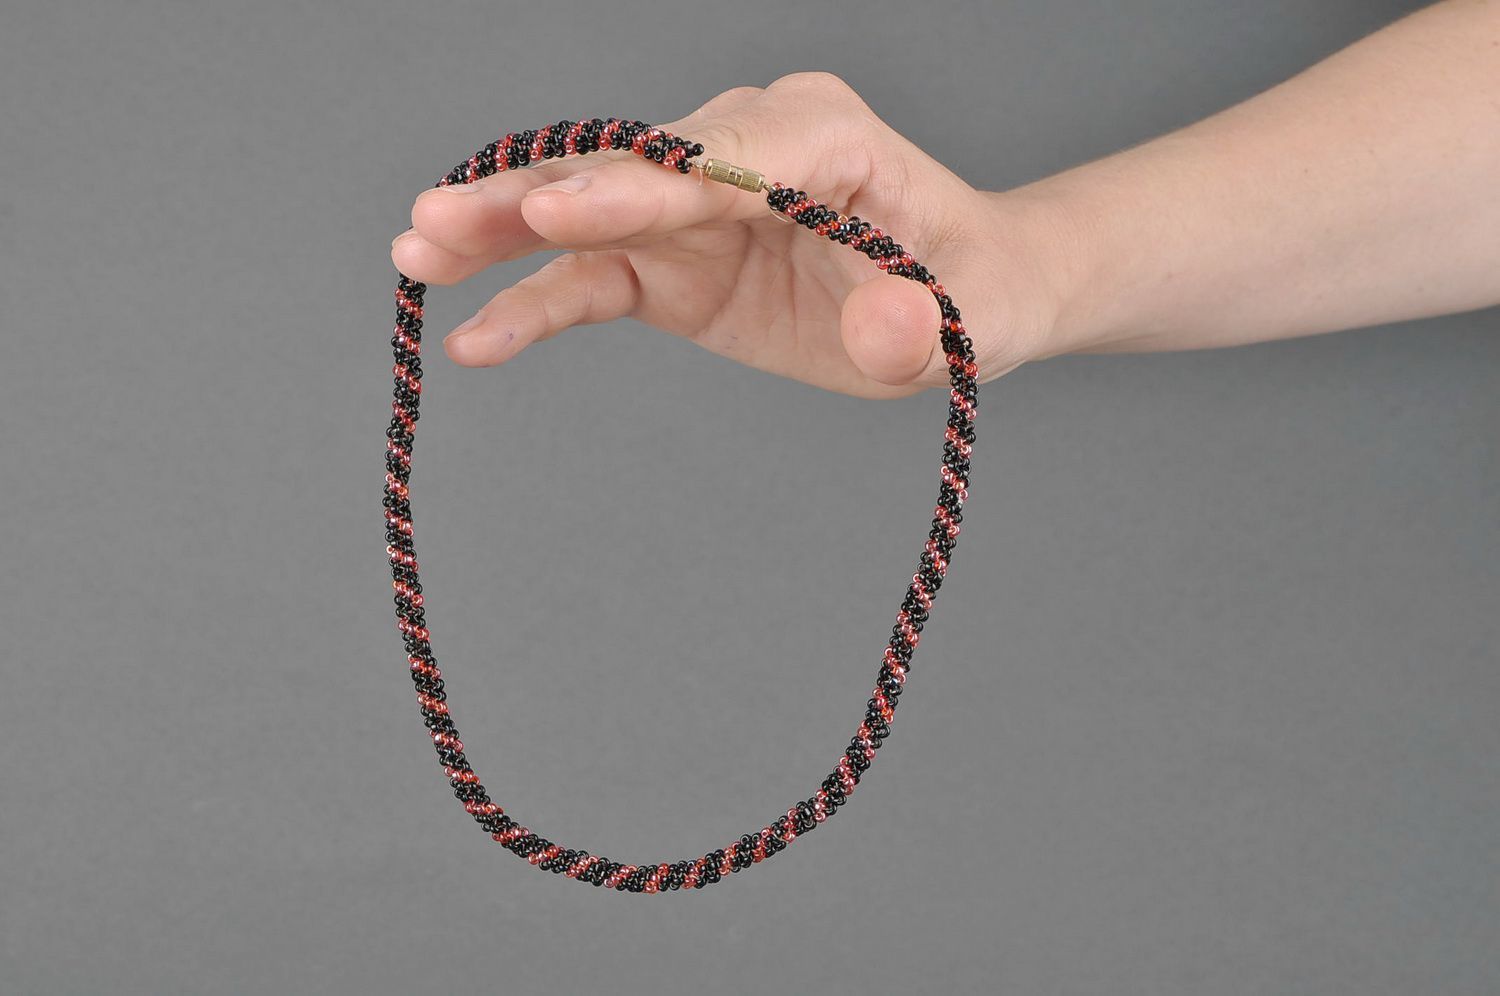 Bracelet-necklace made of chinese beads photo 5